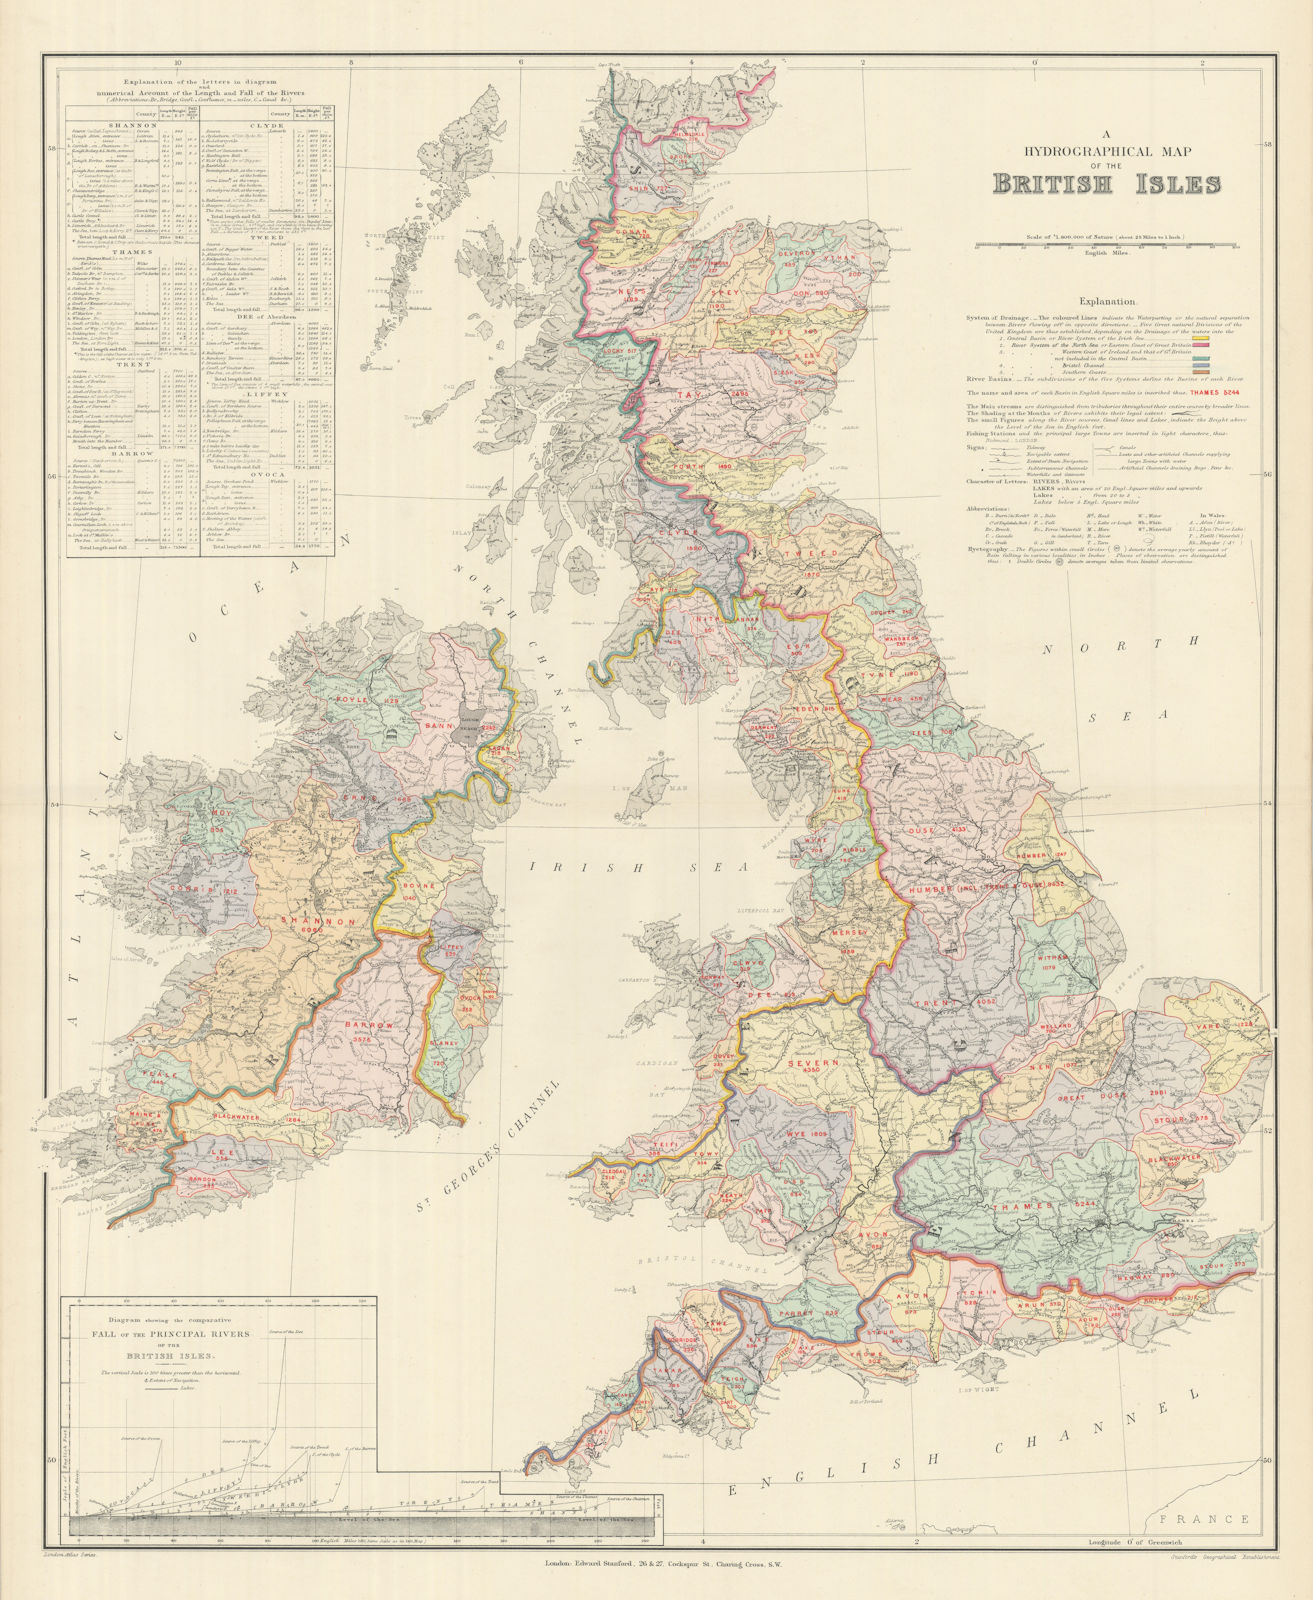 British Isles hydrographical. Watersheds River drainage basins STANFORD 1894 map